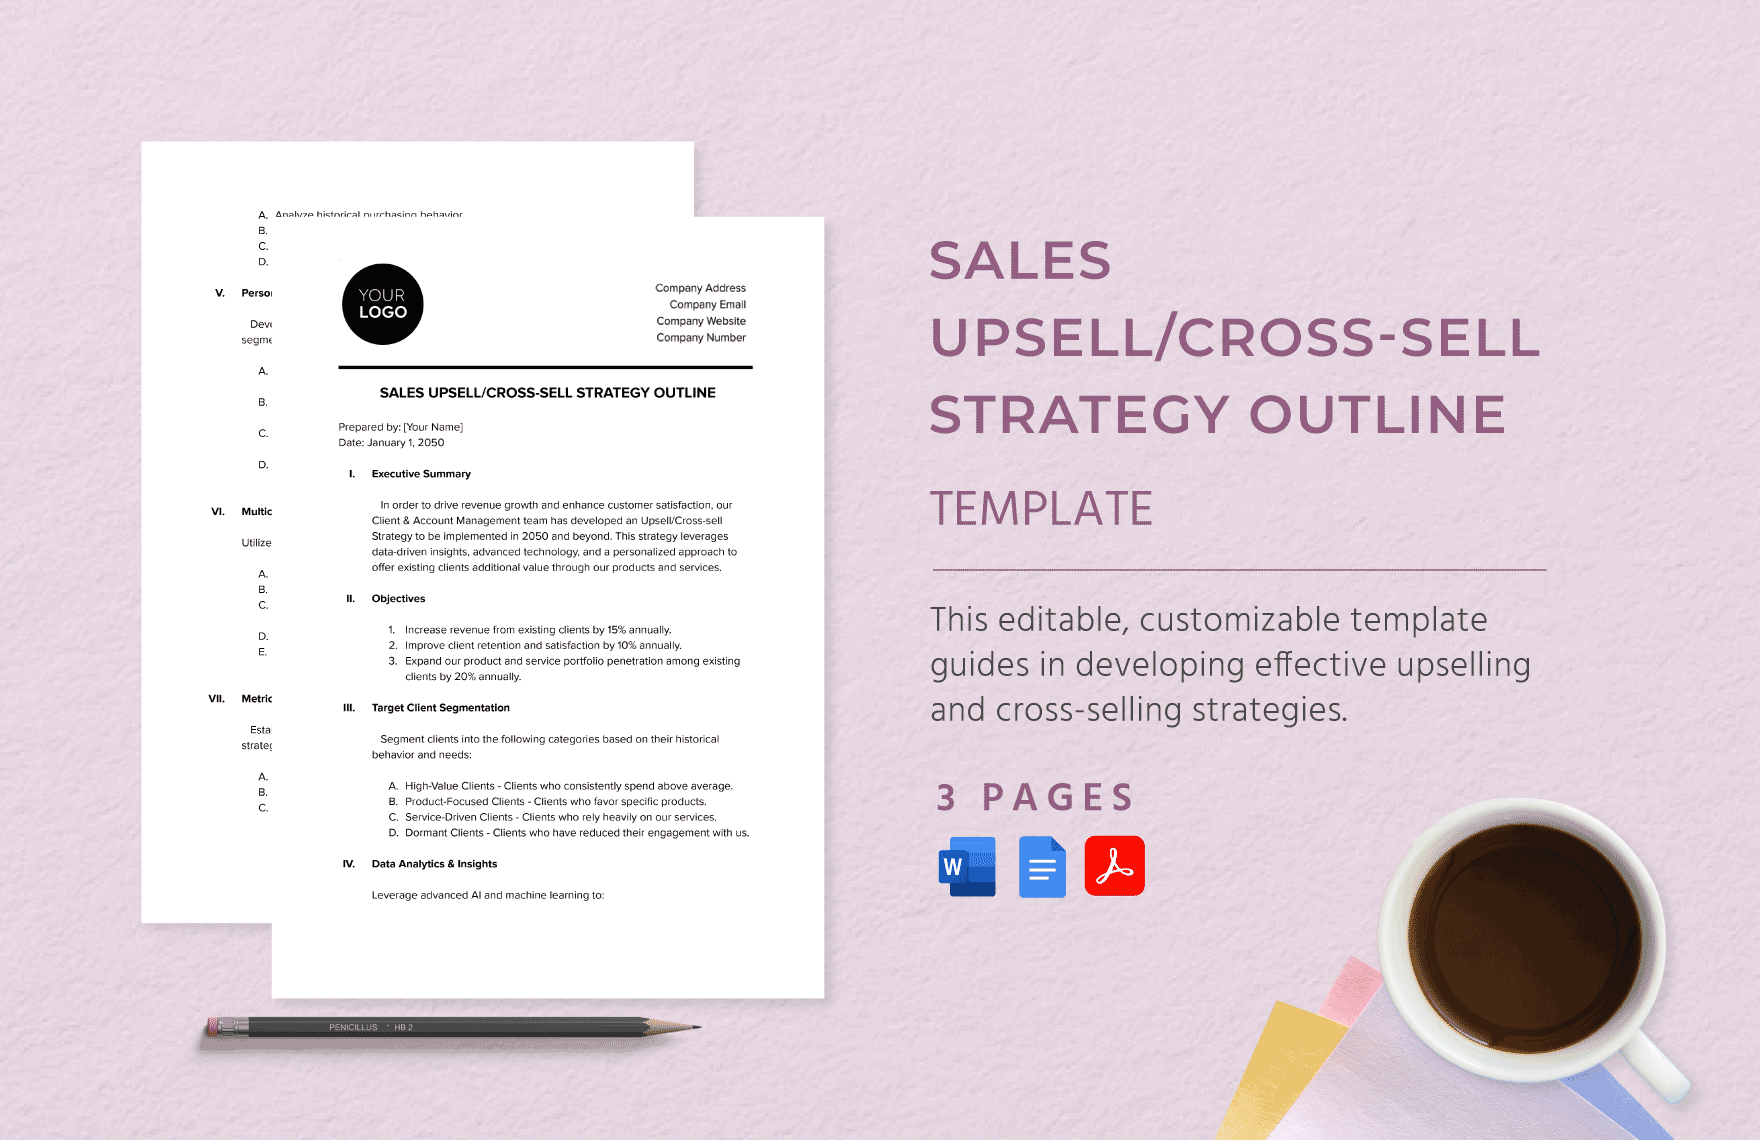 Sales Upsell/Cross-sell Strategy Outline Template